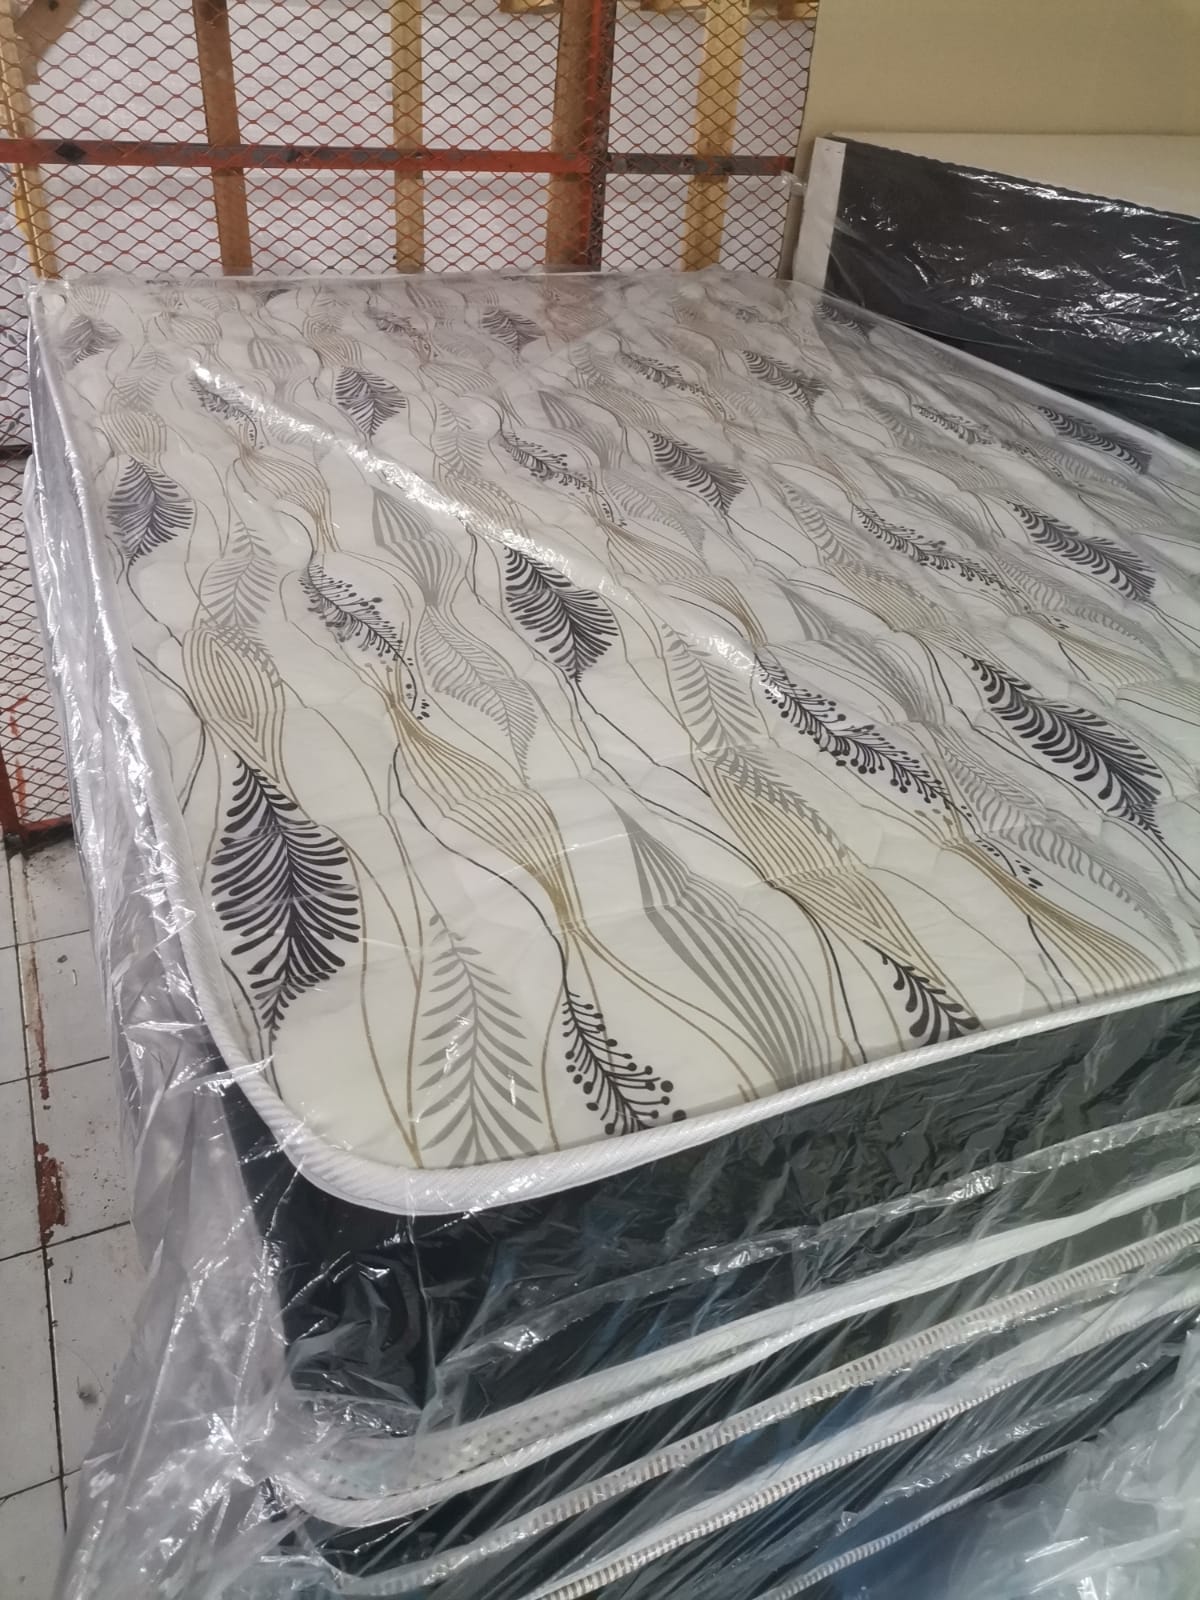 Bamboo beds, Foam beds, Budget beds on special 